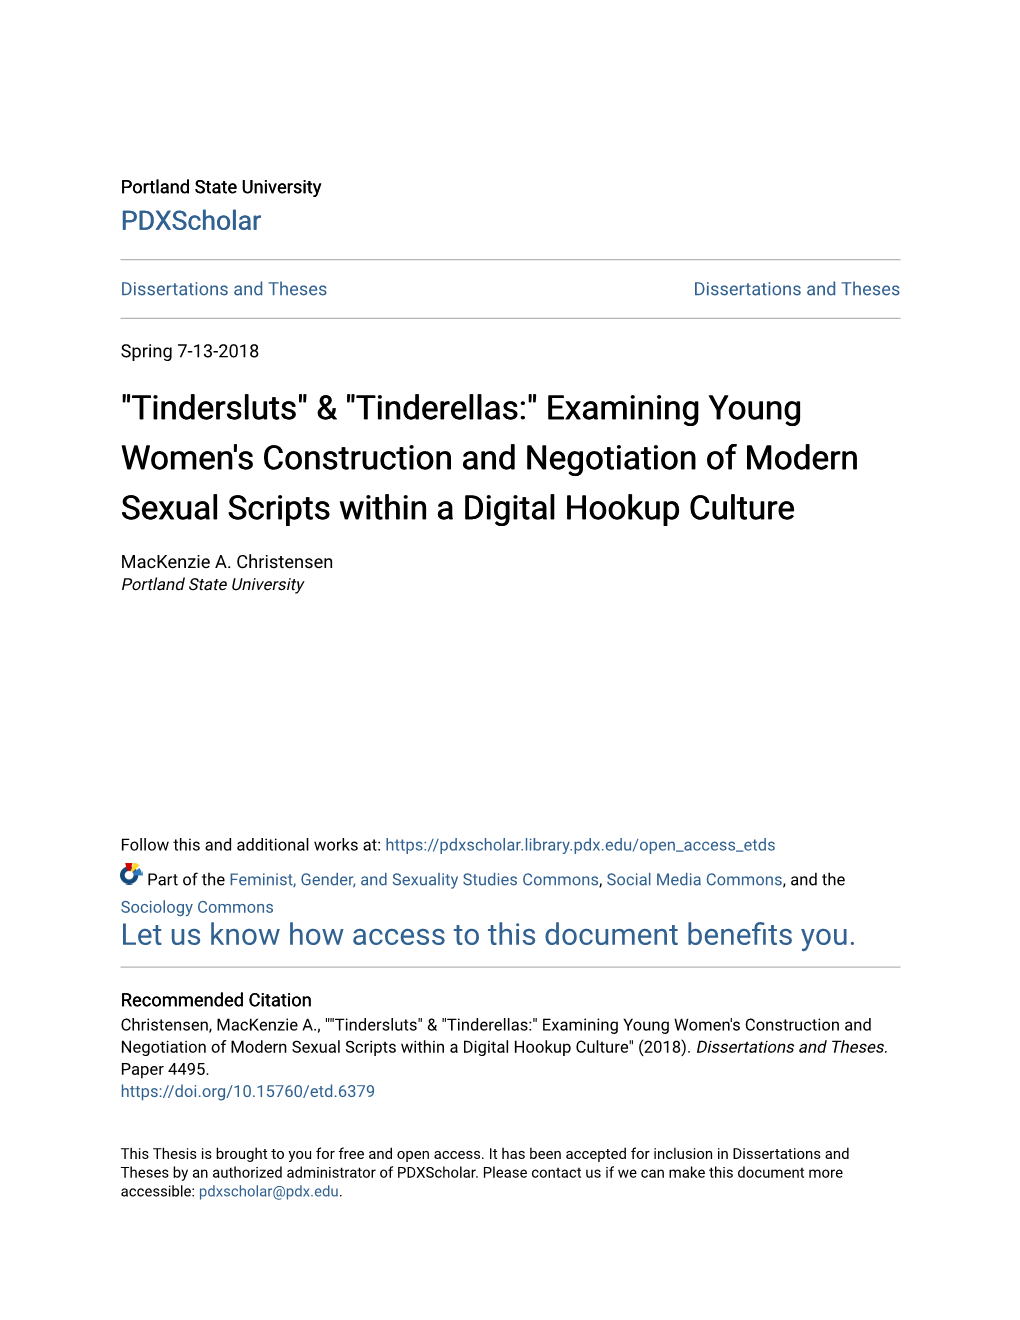 "Tindersluts" & "Tinderellas:" Examining Young Women's Construction and Negotiation of Modern Sexual